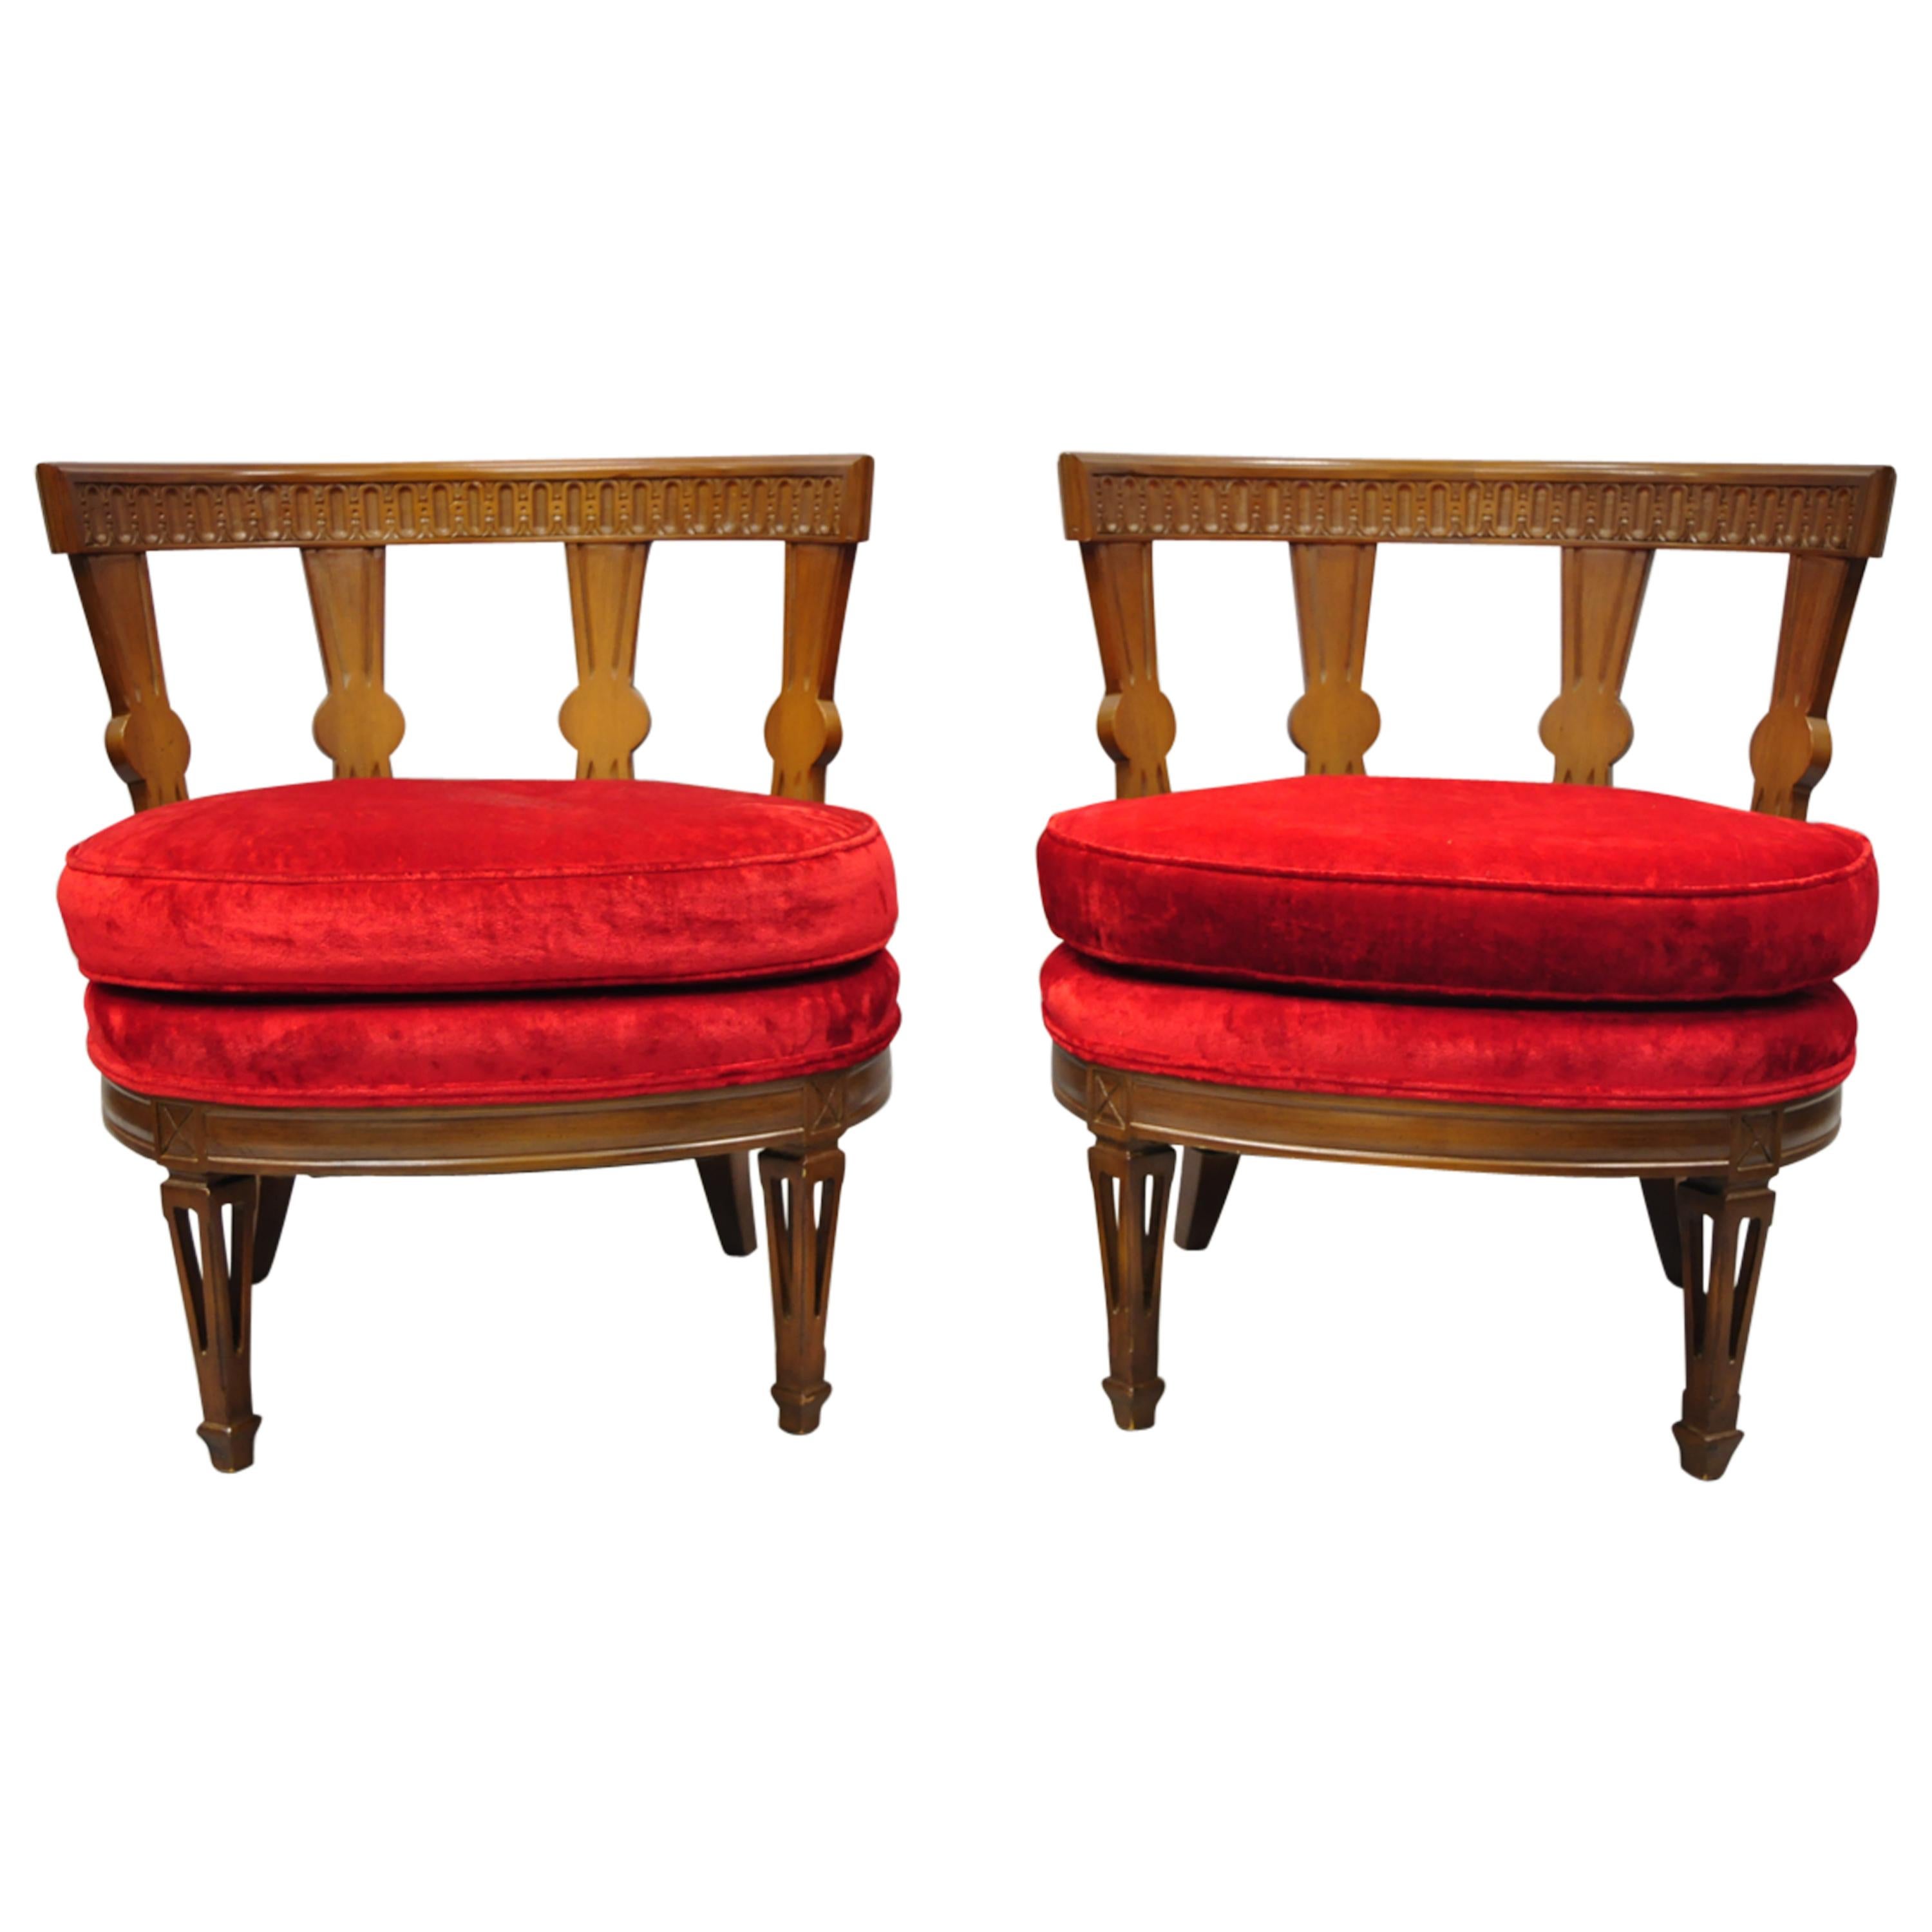  Hollywood Regency Italian Low Barrel Back Red Slipper Lounge Chairs - a Pair